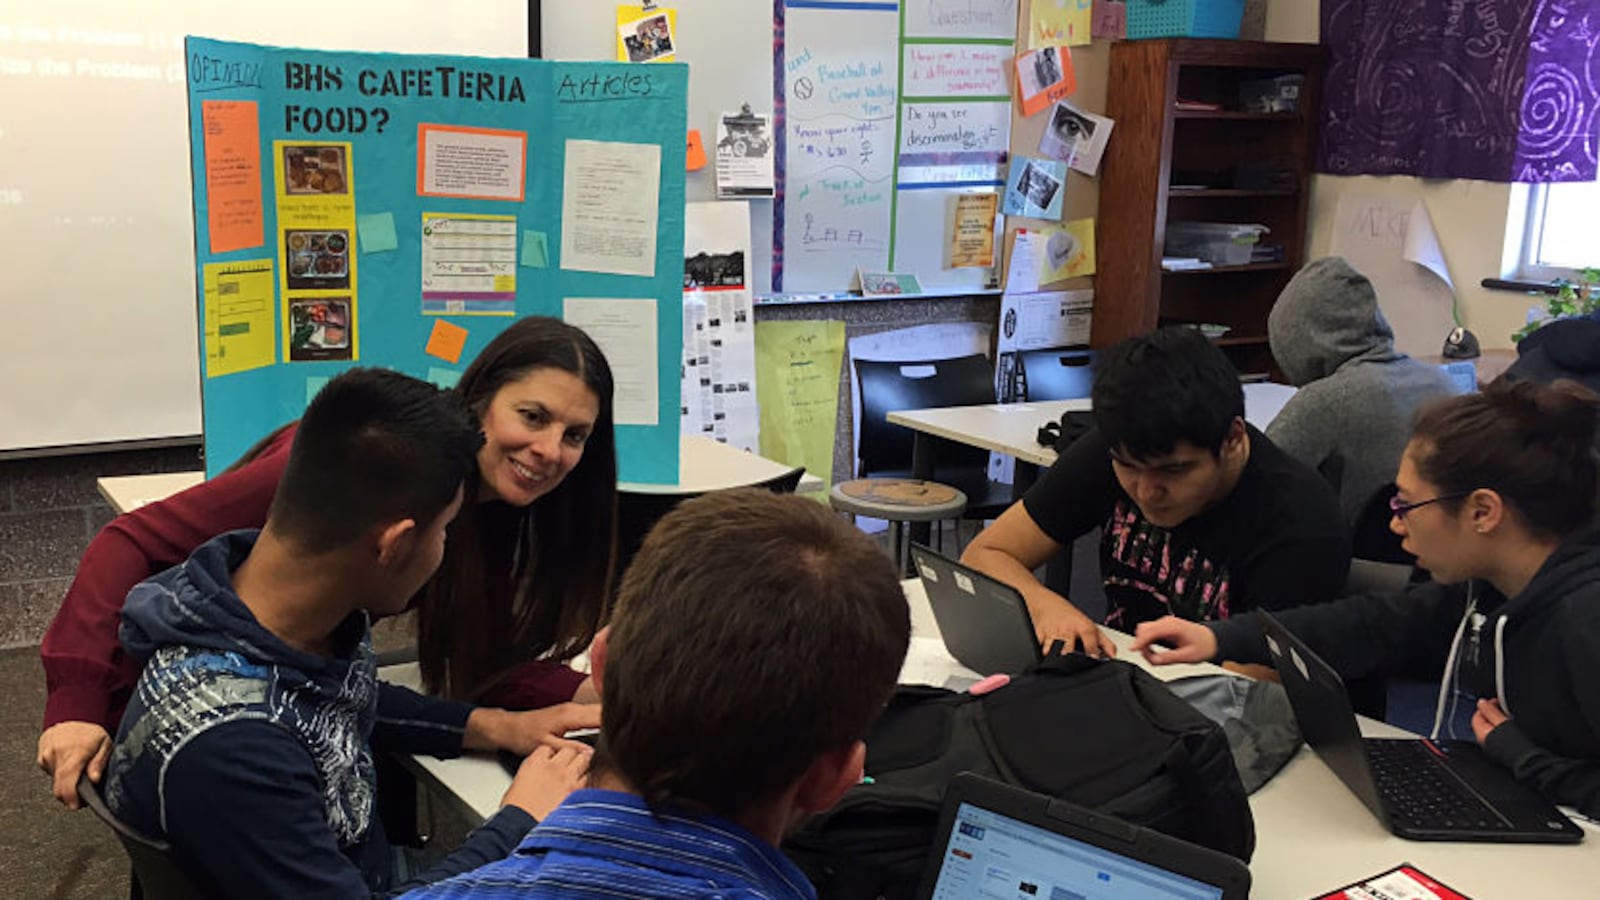 Leticia Guzman Ingram, 2016 Colorado Teacher of the Year, working with students.